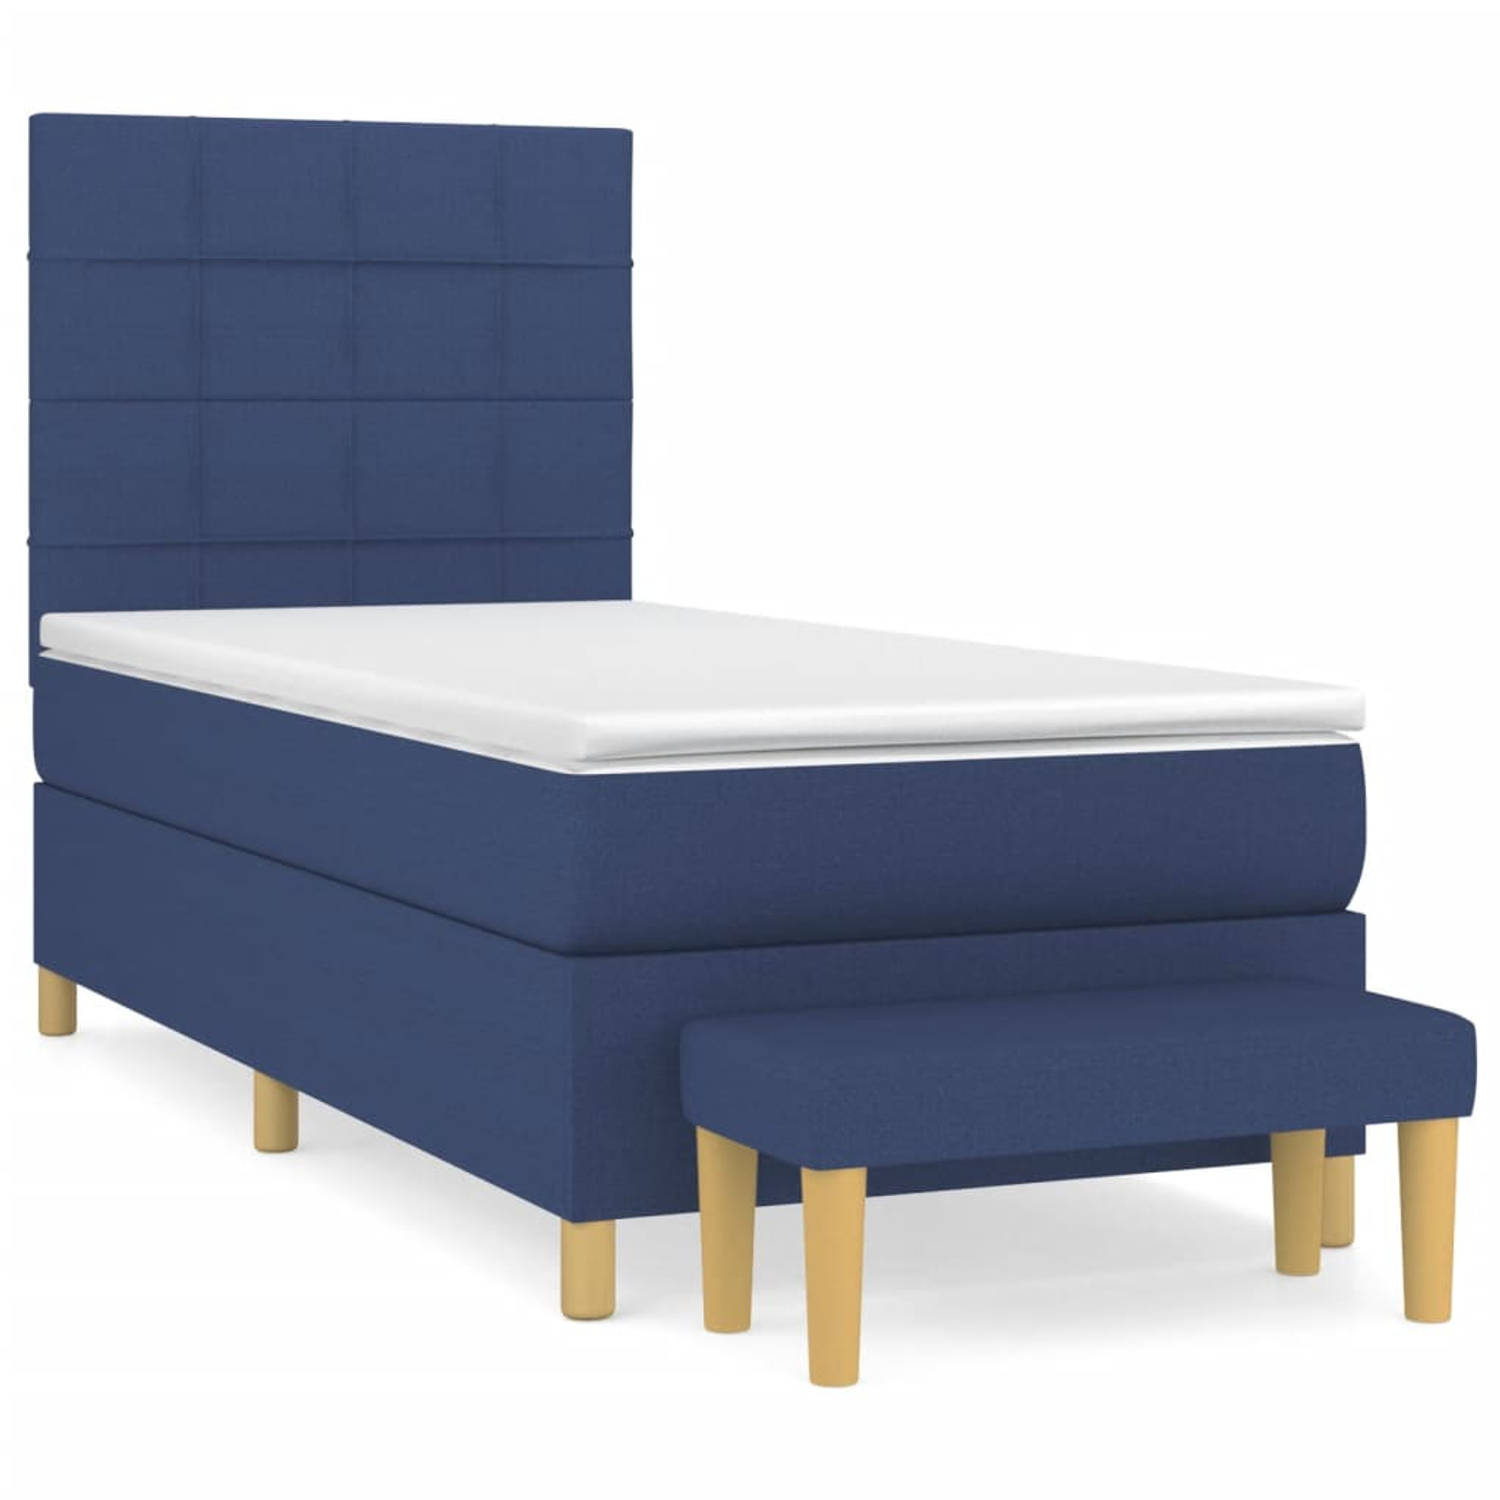 The Living Store Boxspring met matras stof blauw 100x200 cm - Boxspring - Boxsprings - Pocketveringbed - Bed - Slaapmeubel - Boxspringbed - Boxspring Bed - Eenpersoonsbed - Bed Met